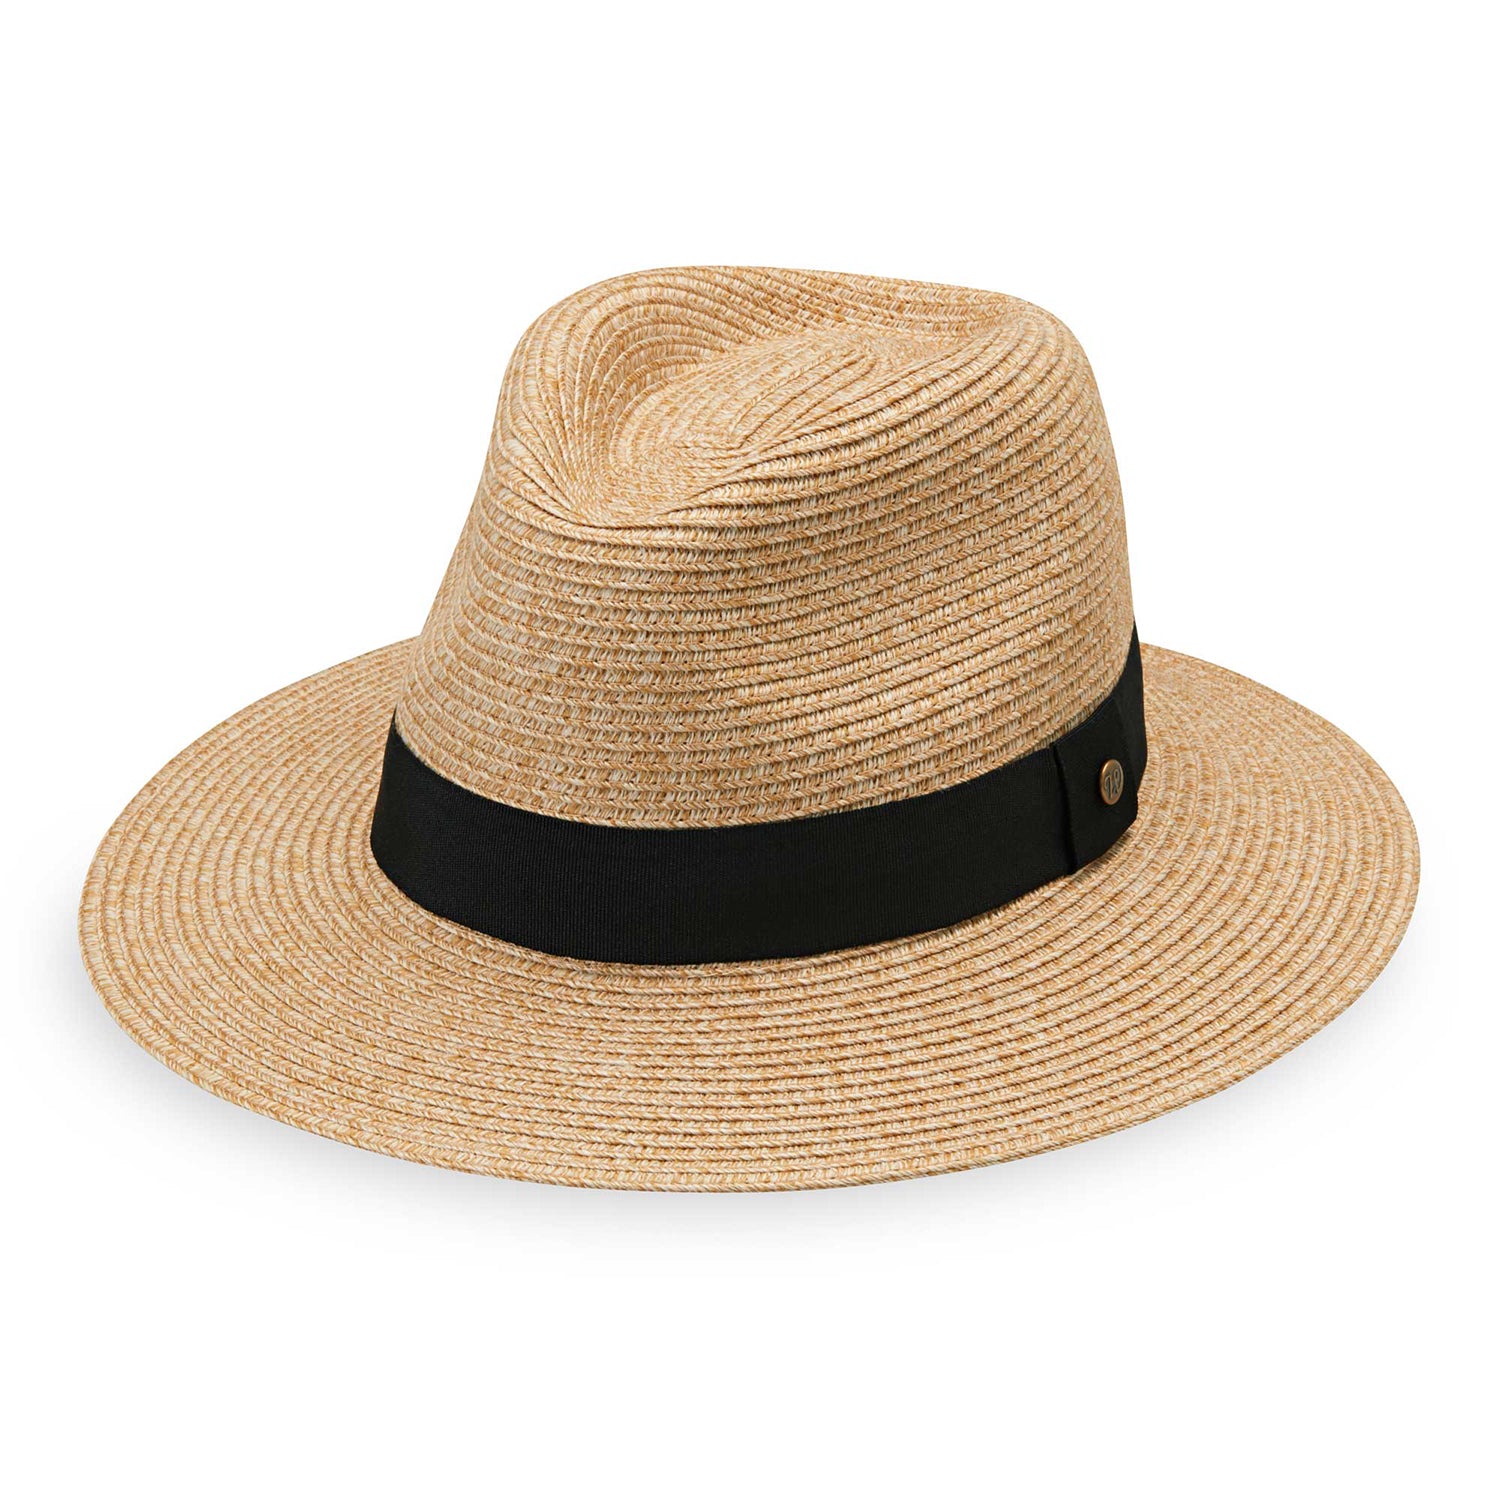 Featuring Ladies' petite palm beach sun hat by Wallaroo, featuring packable and UPF 50+ material